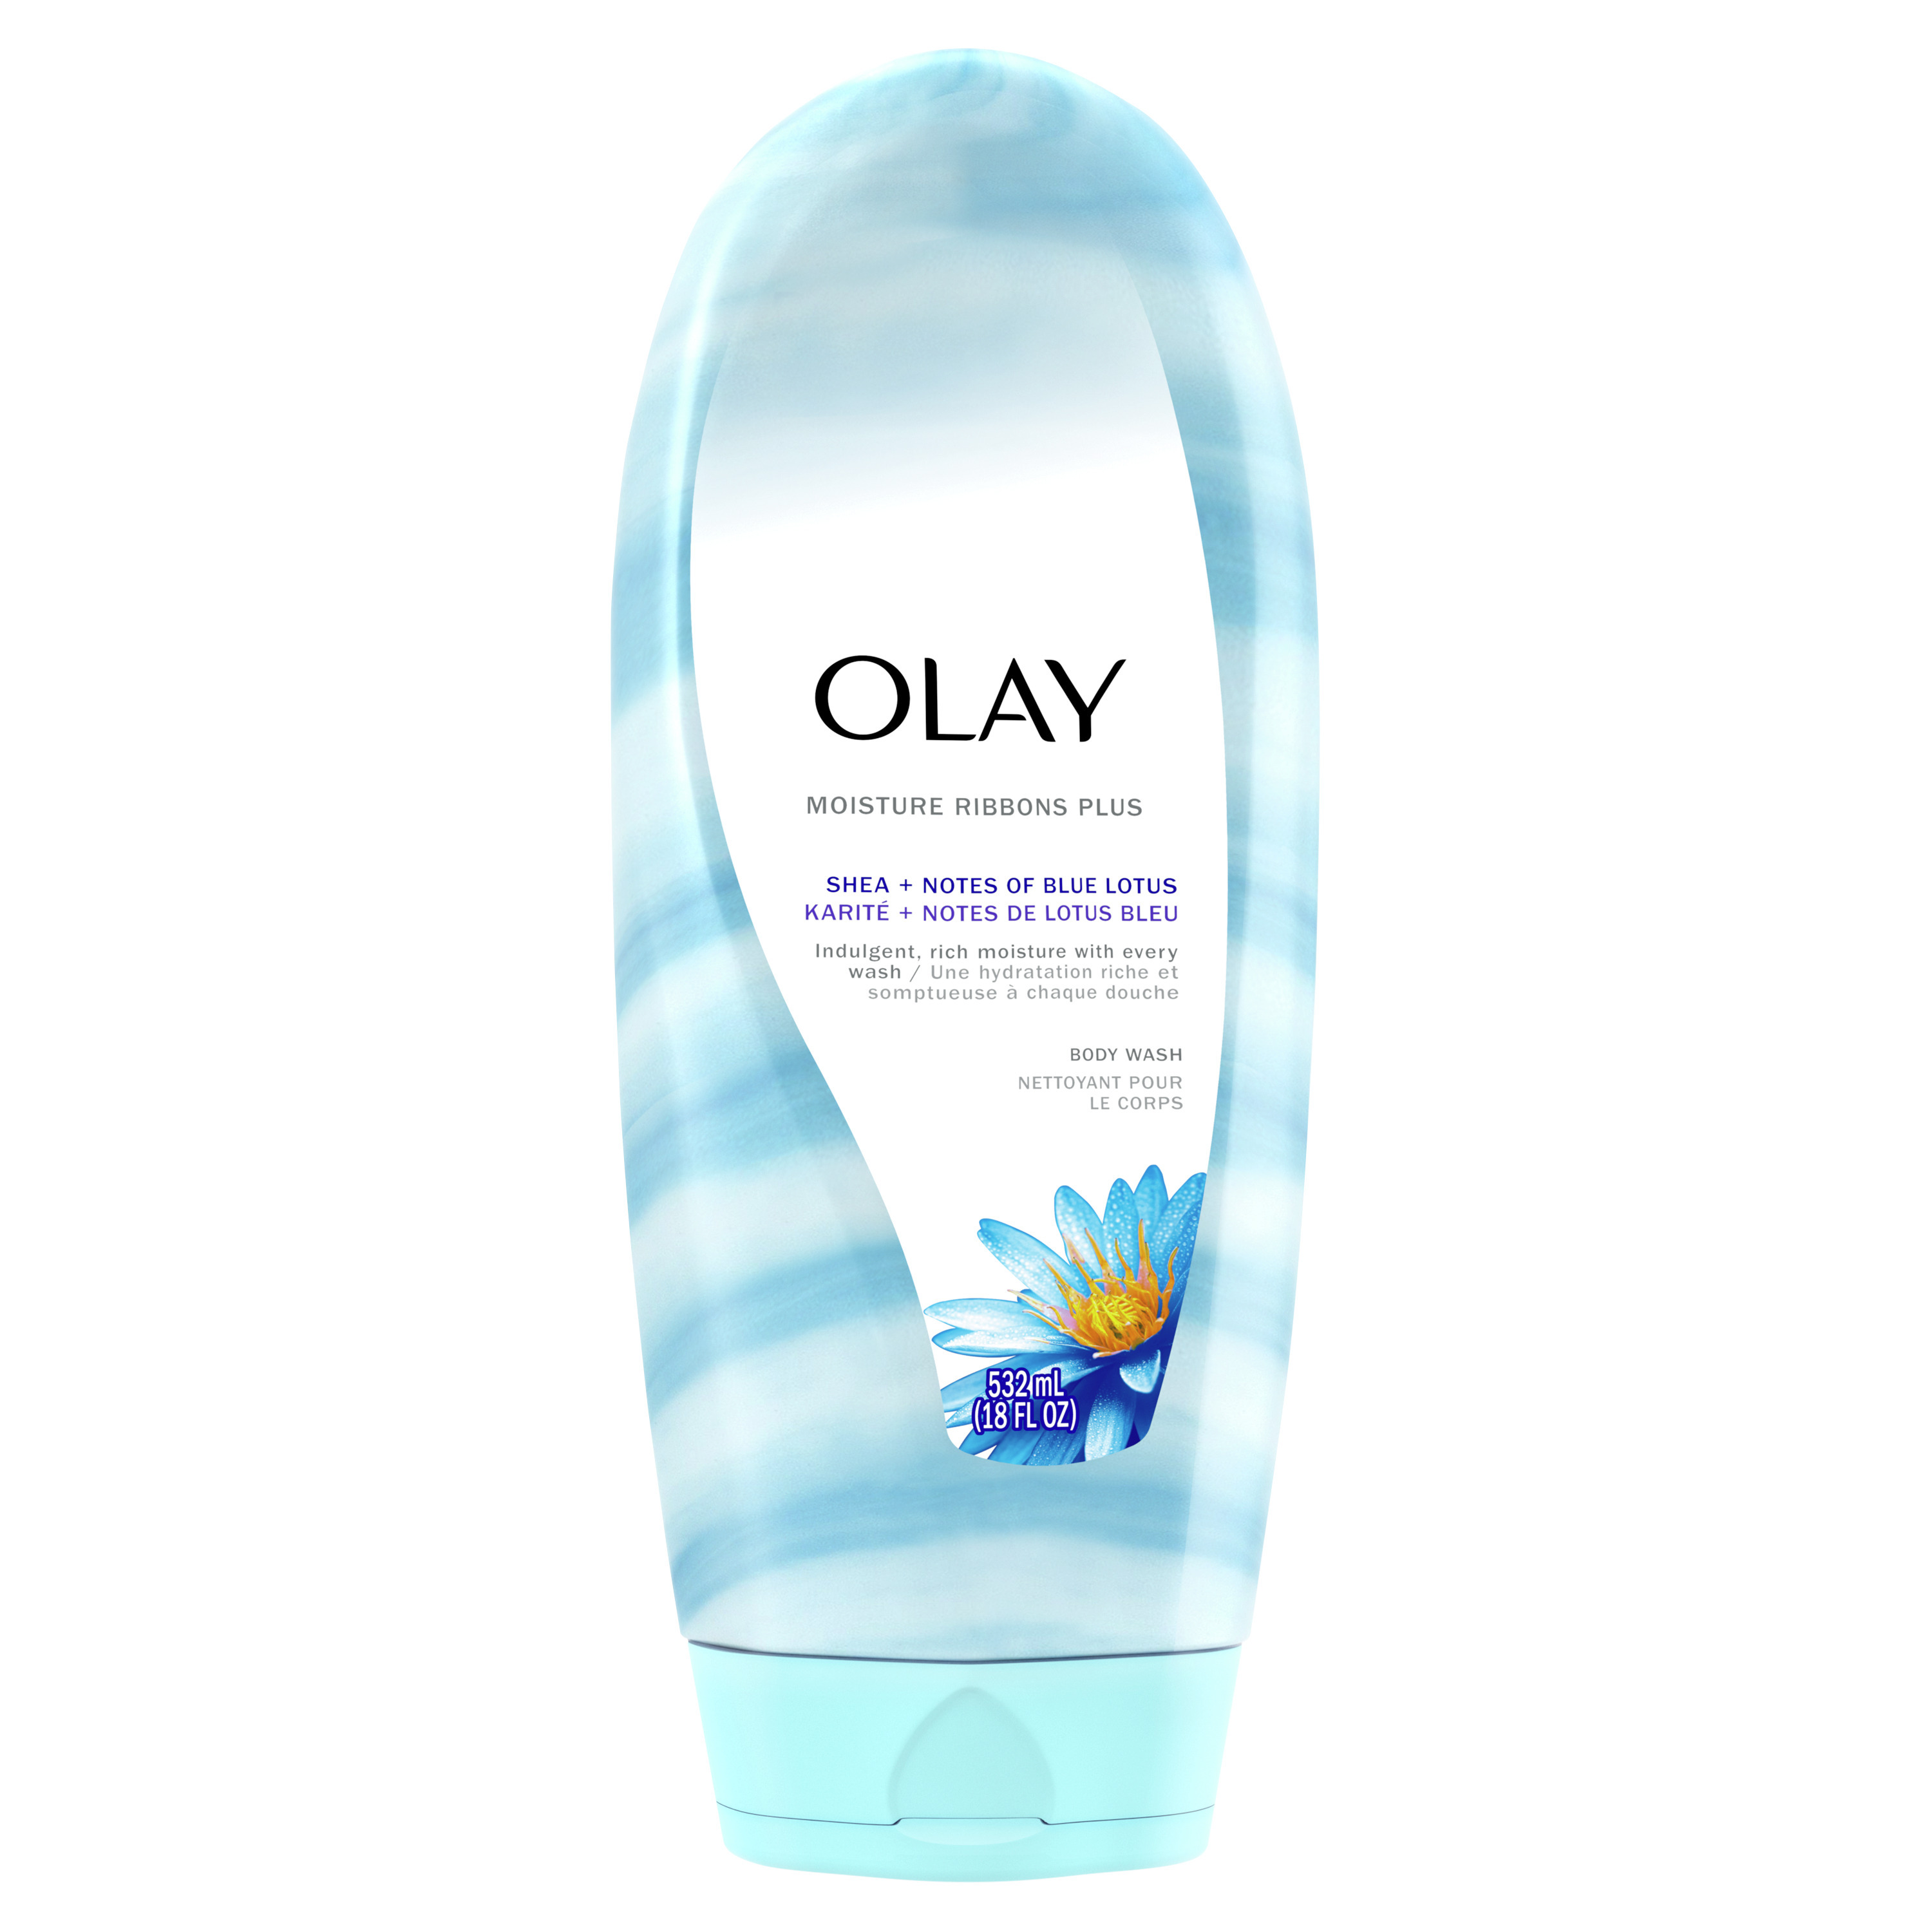 Olay Moisture Ribbons Plus Body Wash for Women, Shea and Blue Lotus, for All Skin Types, 18 fl oz - image 2 of 7